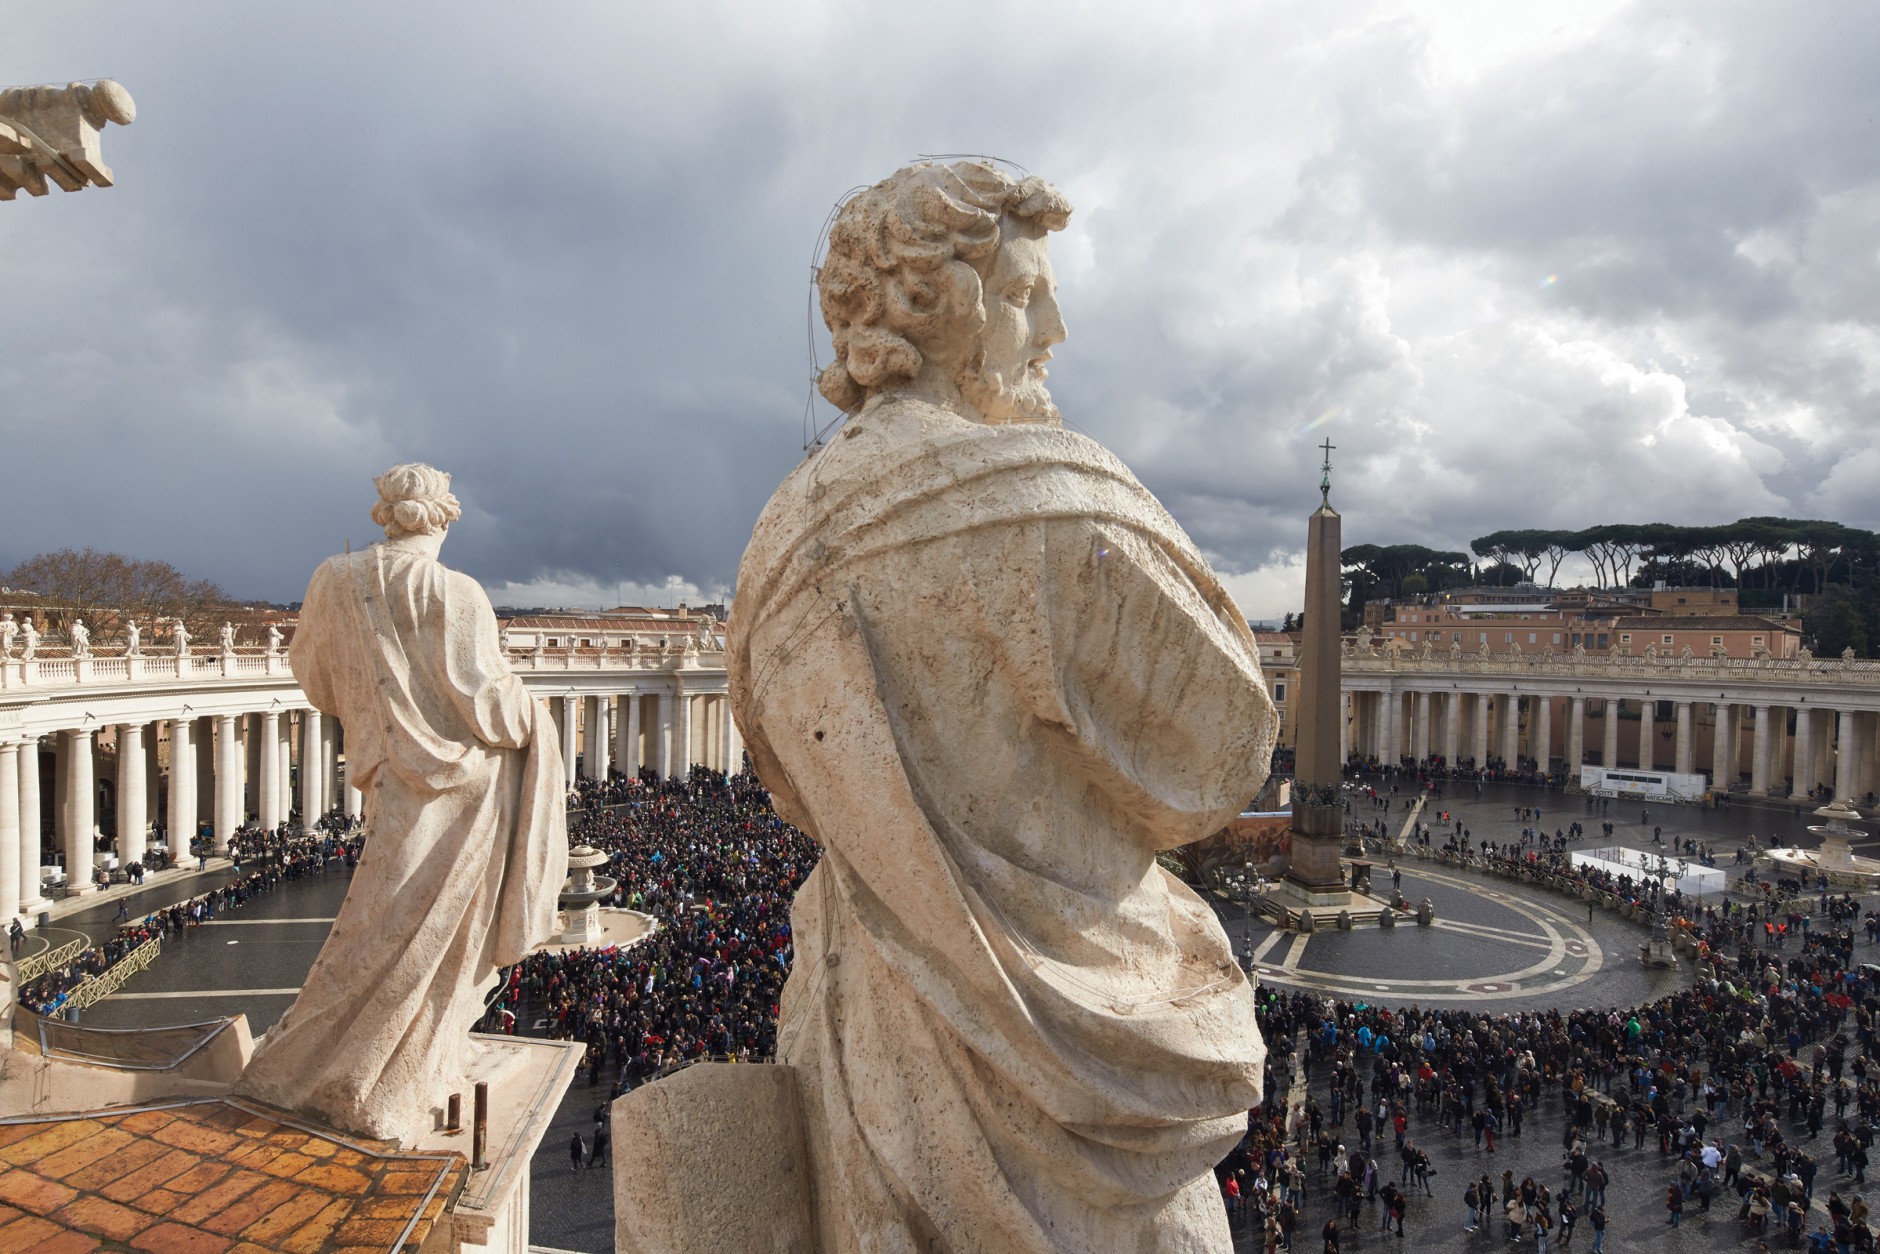 A saint’s-eye view of St. Peter’s Square gives the perspective from 2 of the 140 statues of saints that line the balustrade above the colonnade. The 82-foot-high Egyptian obelisk can be seen in the square. (Dave Yoder/National Geographic)